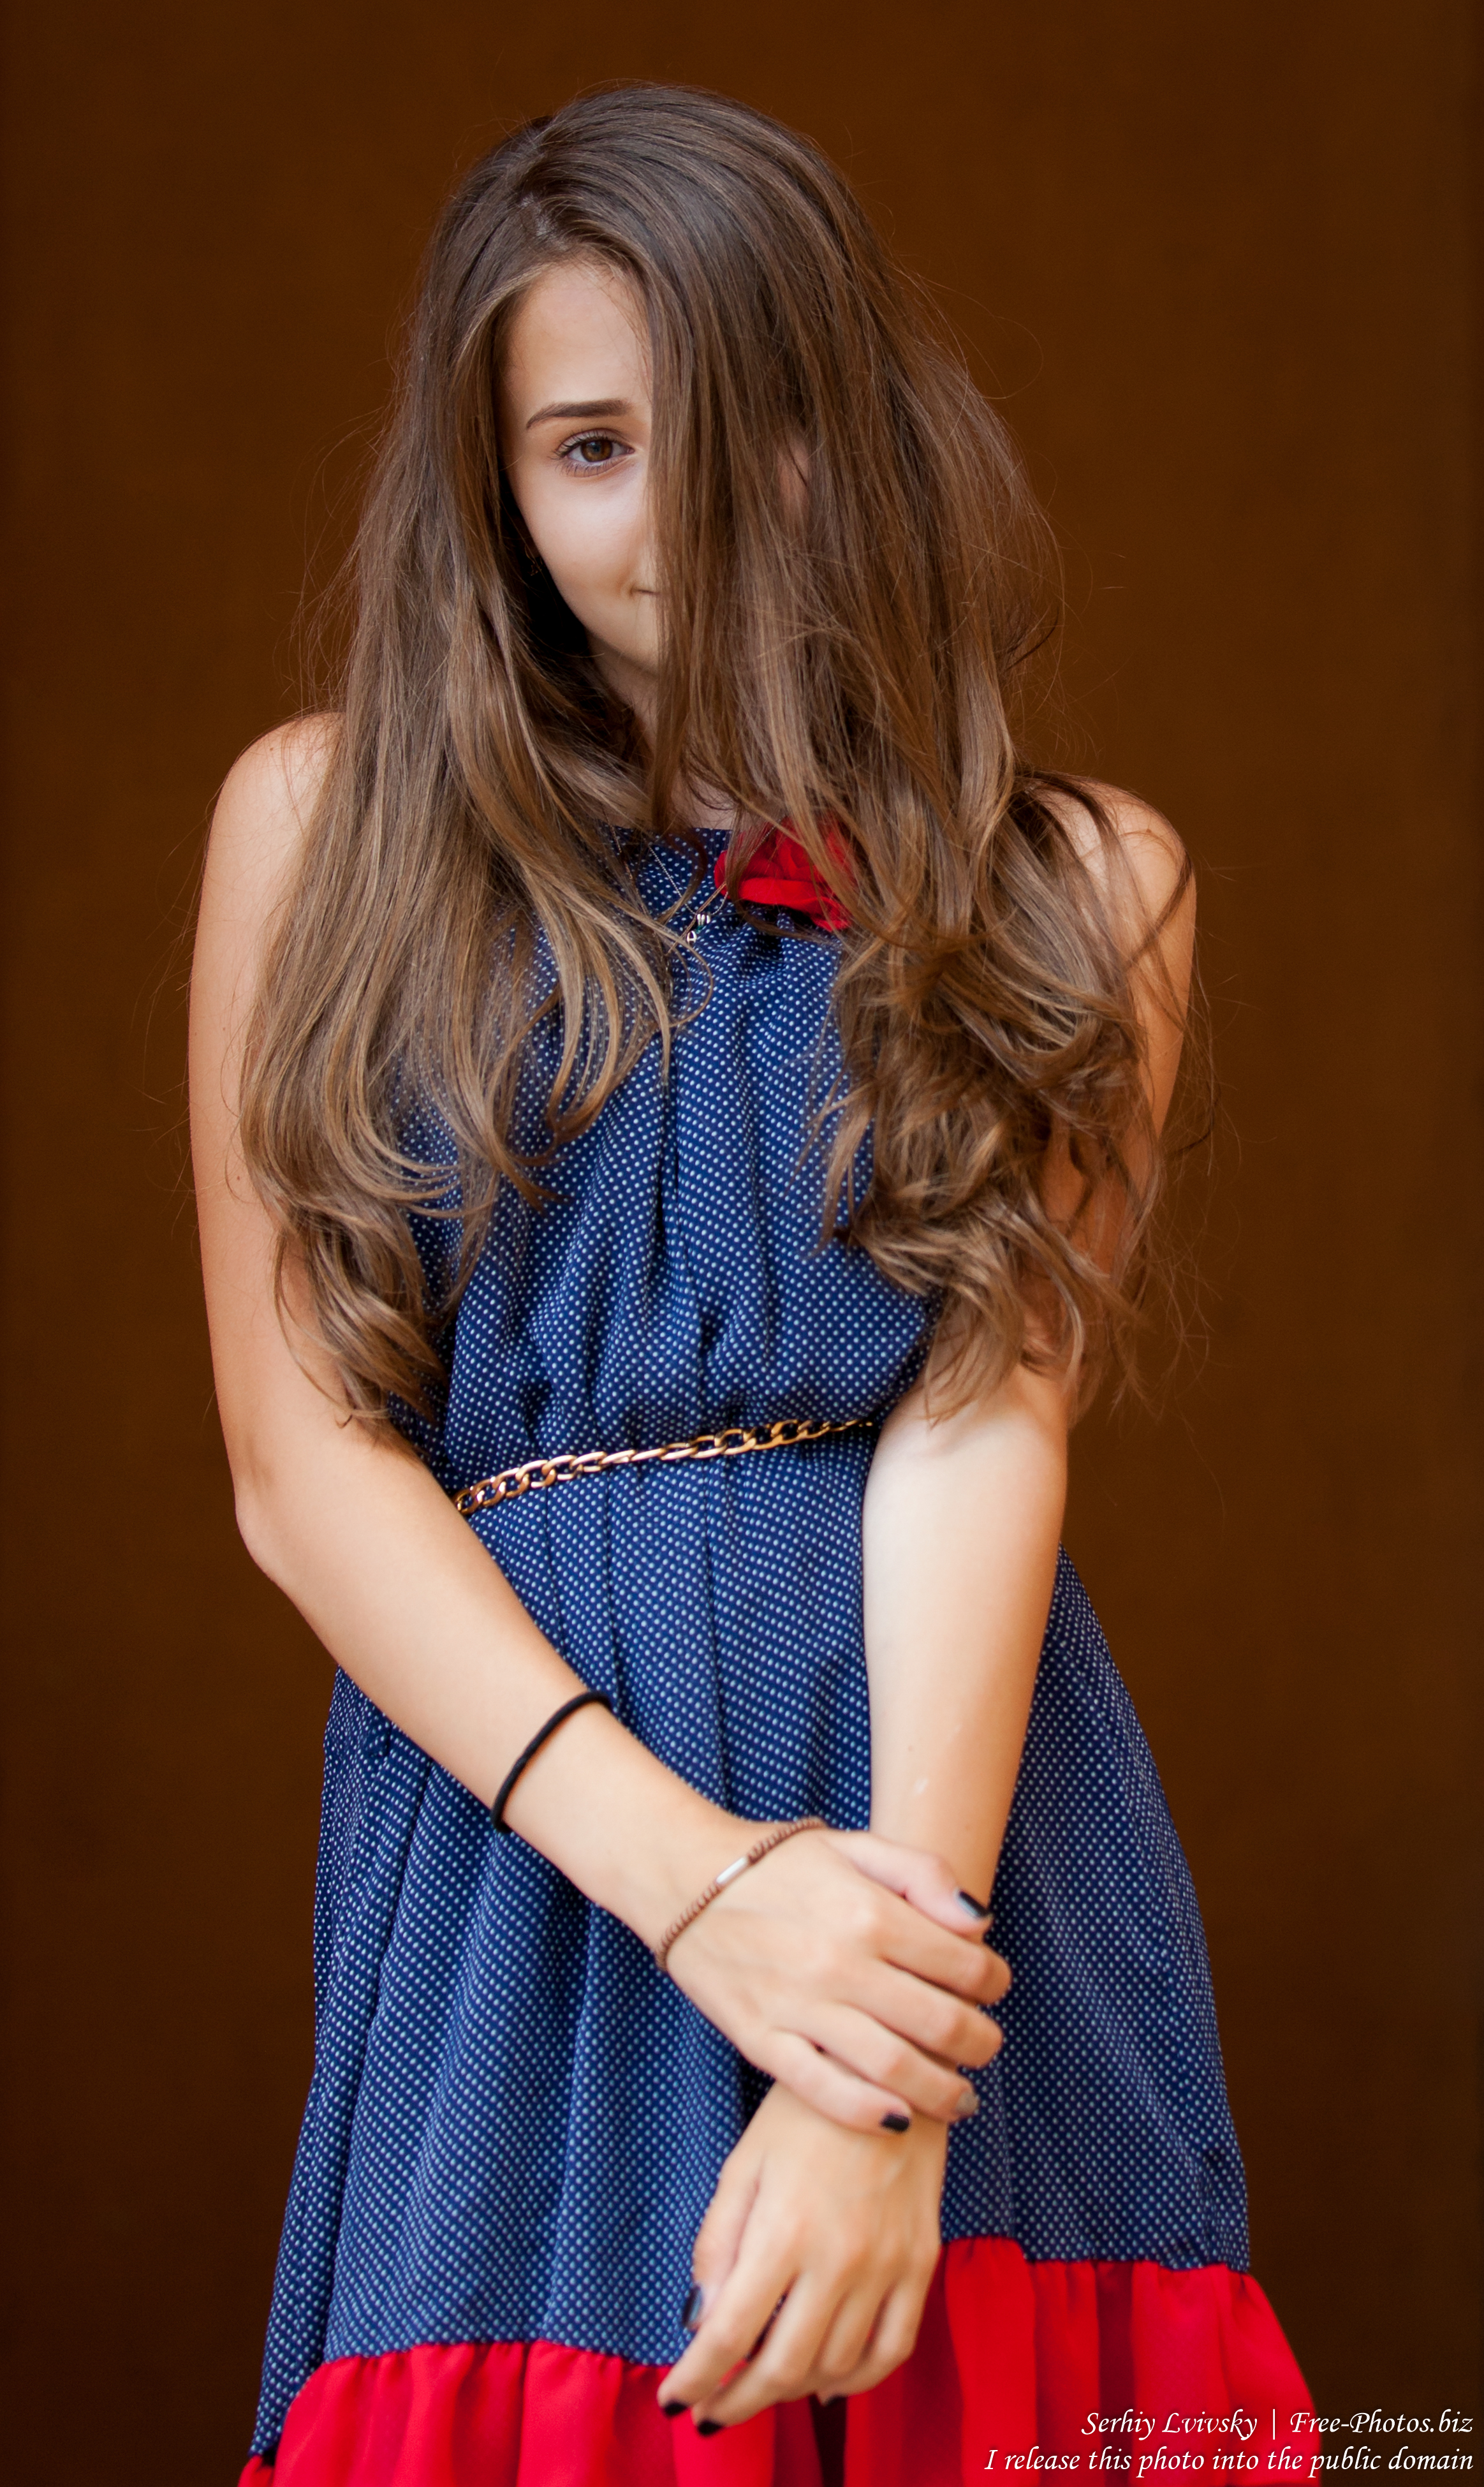 a 14-year-old brunette girl photographed in July 2015, picture 9